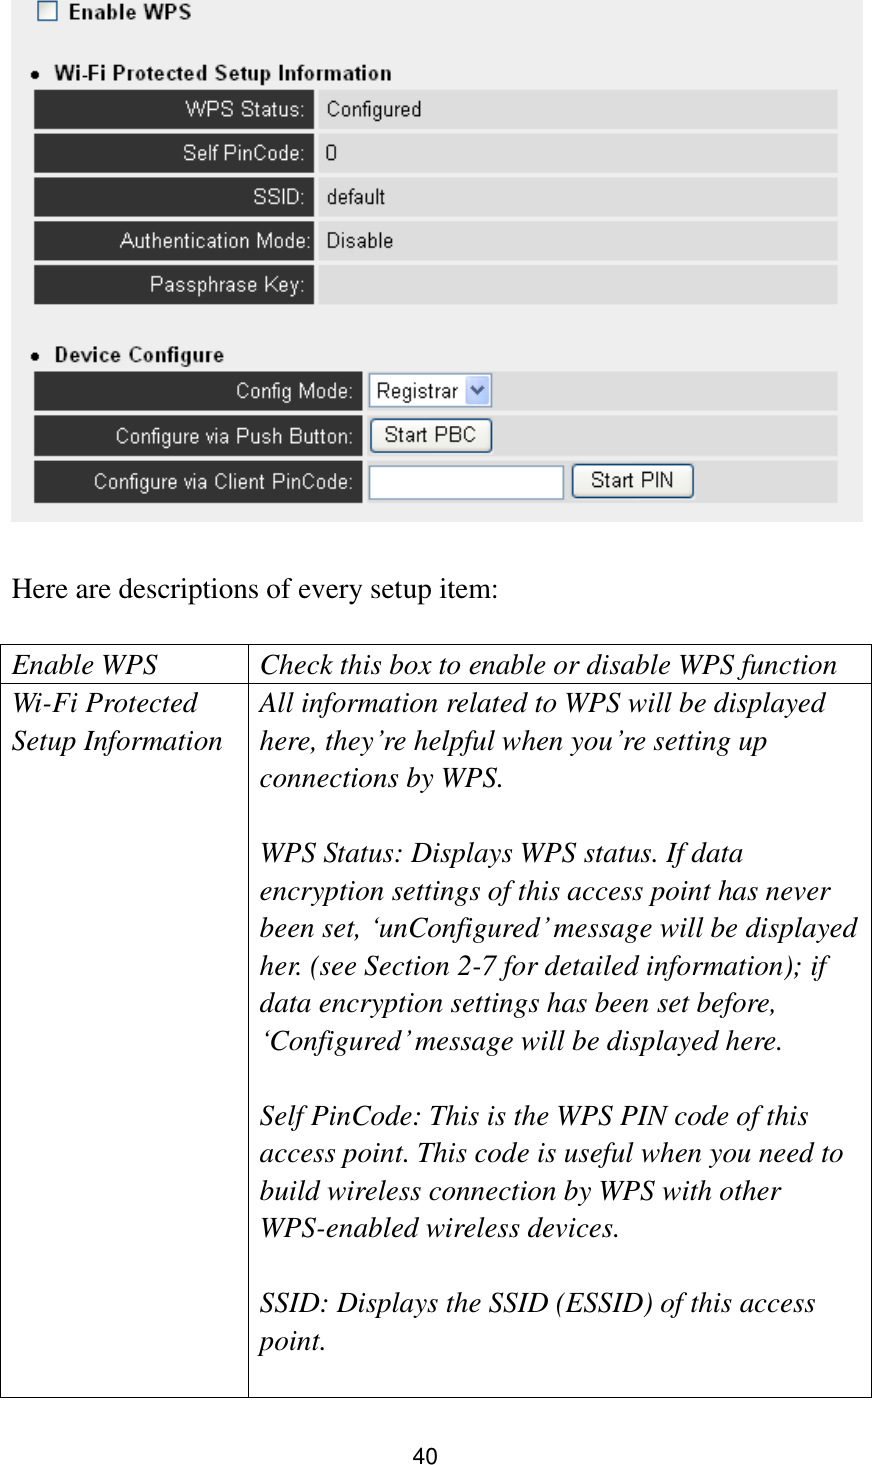 40   Here are descriptions of every setup item:  Enable WPS Check this box to enable or disable WPS function Wi-Fi Protected Setup Information All information related to WPS will be displayed here, they‟re helpful when you‟re setting up connections by WPS.  WPS Status: Displays WPS status. If data encryption settings of this access point has never been set, „unConfigured‟ message will be displayed her. (see Section 2-7 for detailed information); if data encryption settings has been set before, „Configured‟ message will be displayed here.    Self PinCode: This is the WPS PIN code of this access point. This code is useful when you need to build wireless connection by WPS with other WPS-enabled wireless devices.  SSID: Displays the SSID (ESSID) of this access point.  